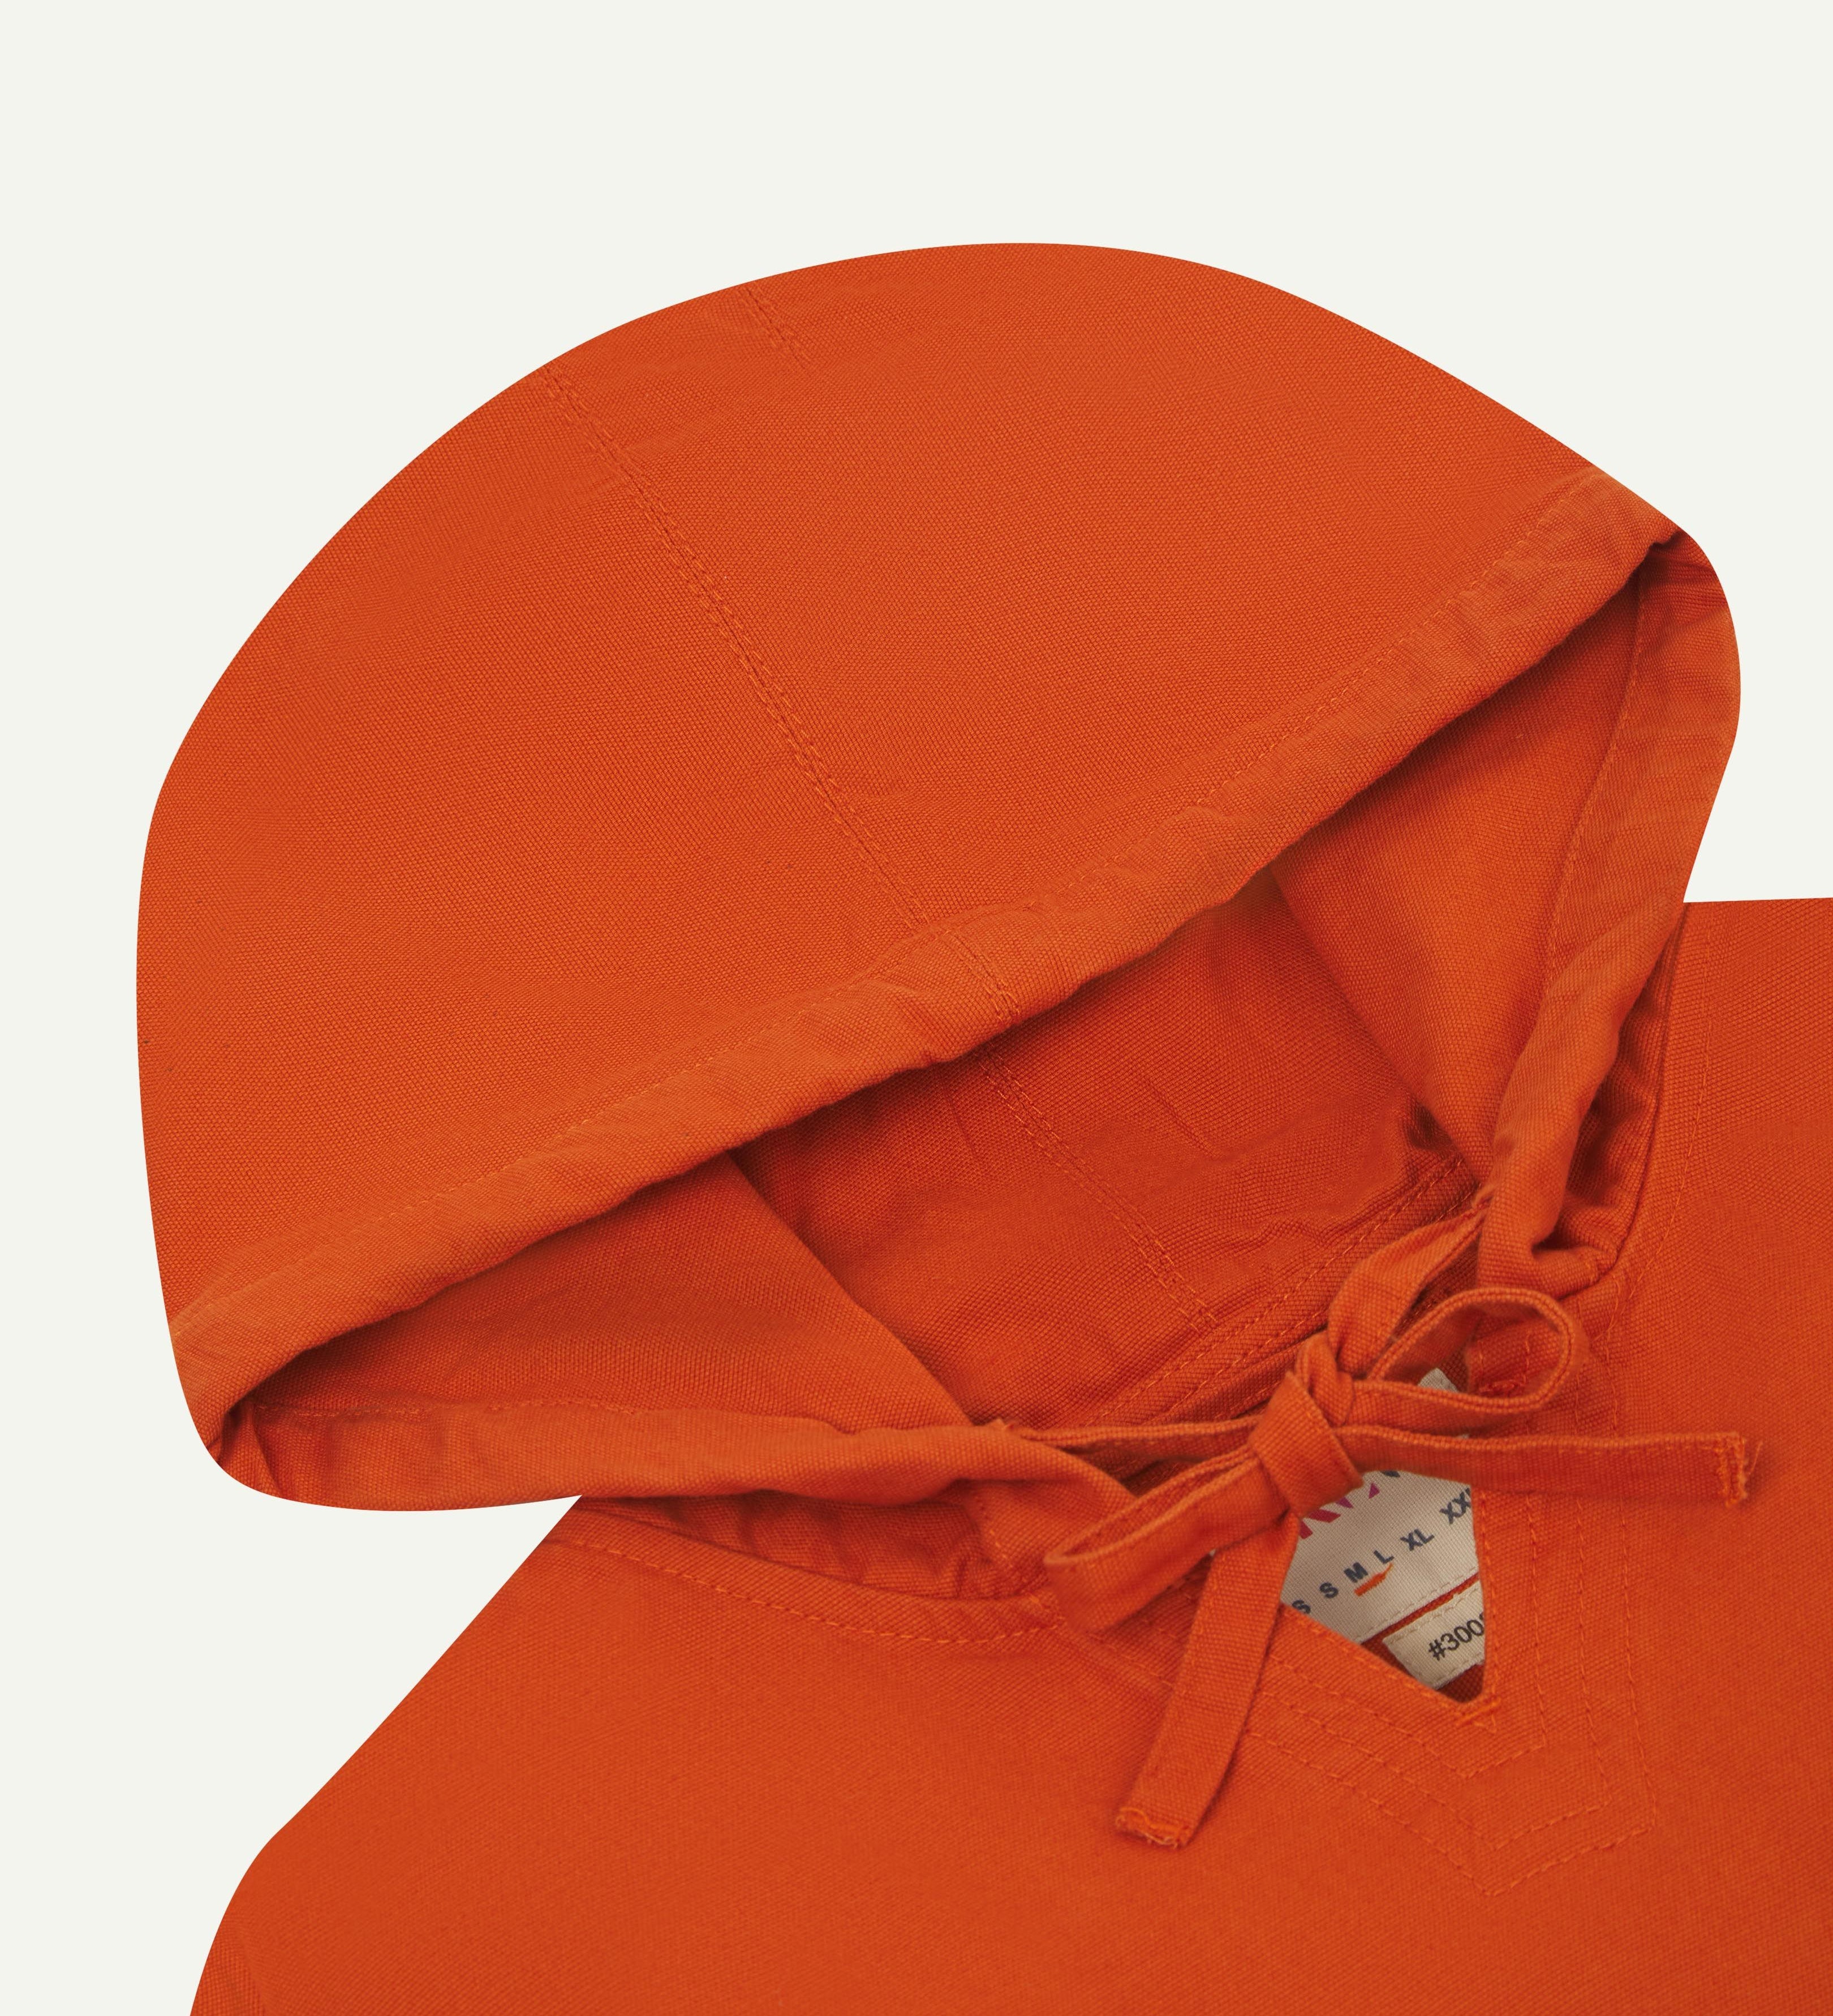 front close view of 'gold' coloured men's smock from Uskees showing the ties at the neck, hood and brand label.